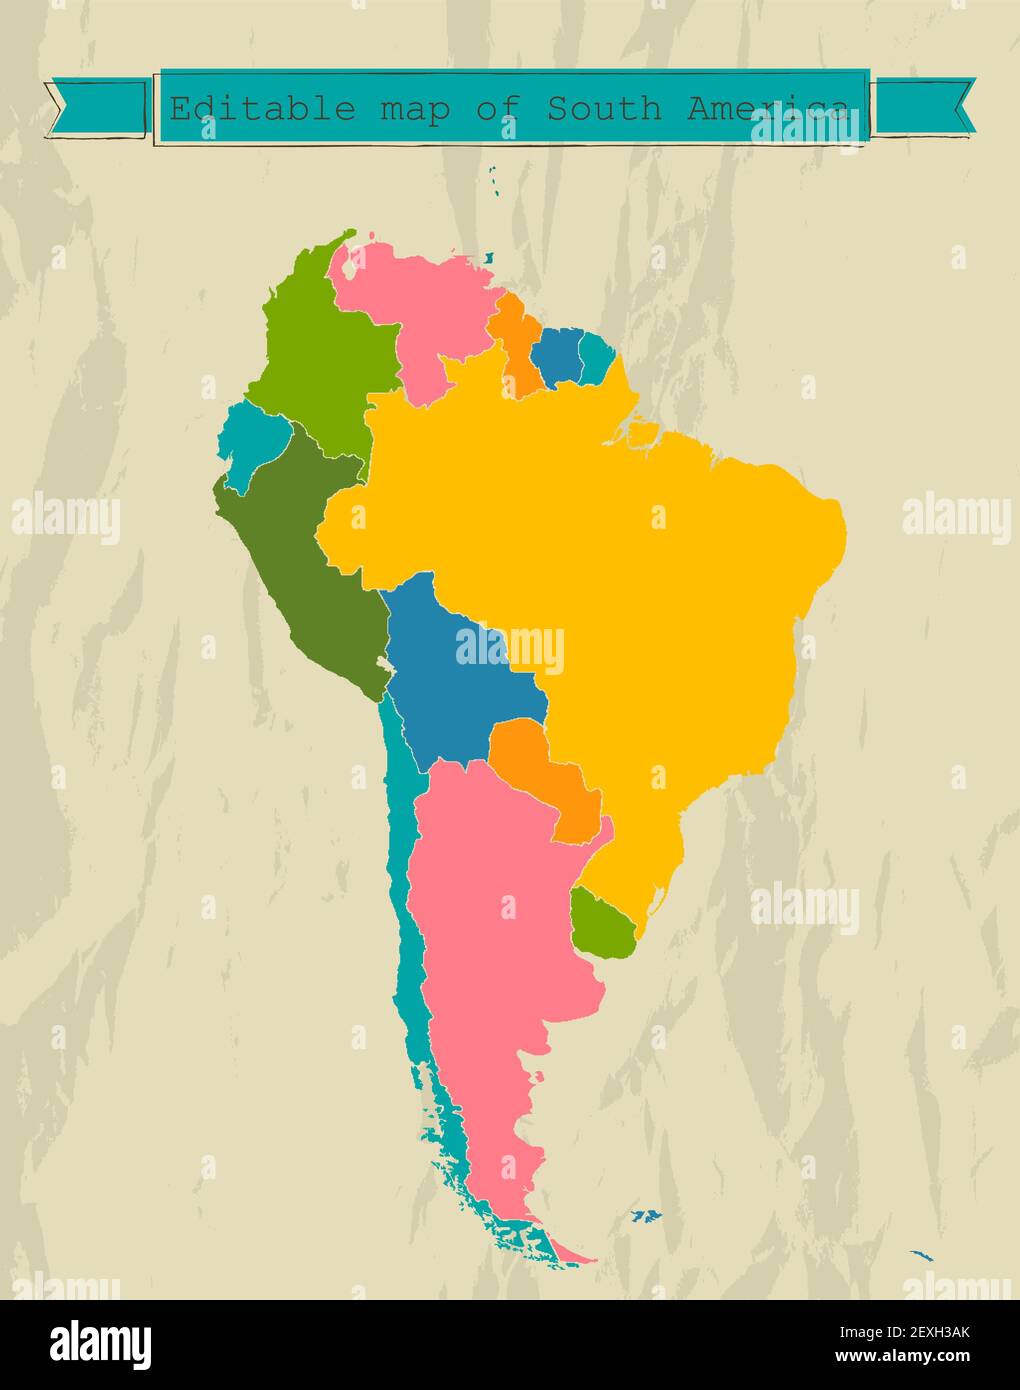 Editable South America  map with all countries. Stock Photo